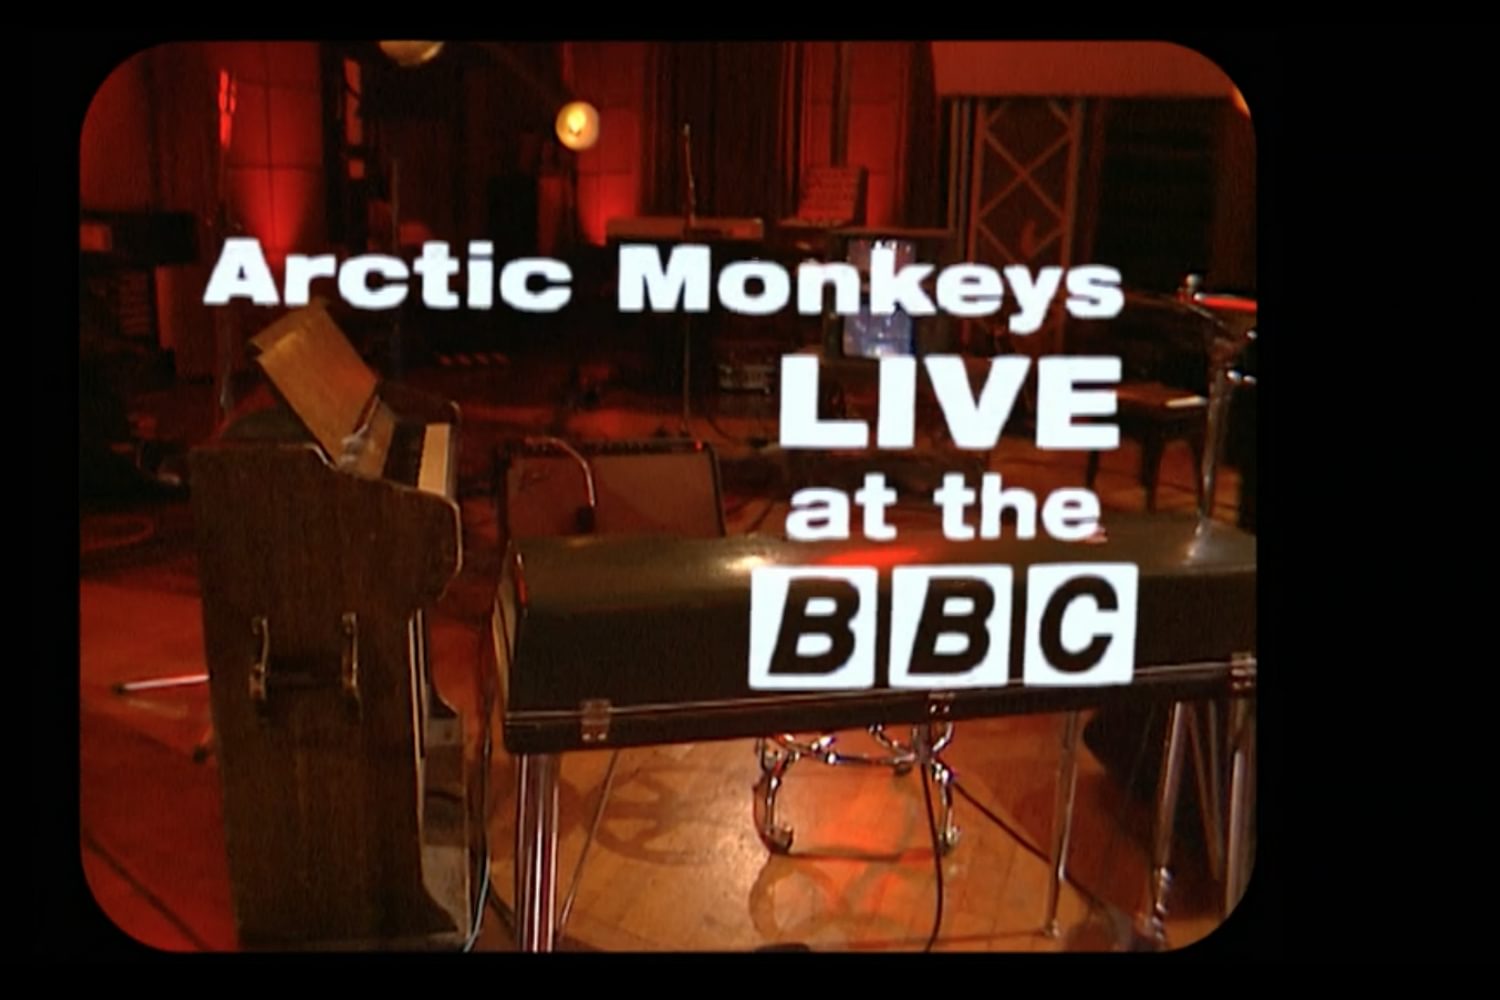 Watch Arctic Monkeys perform live at the BBC